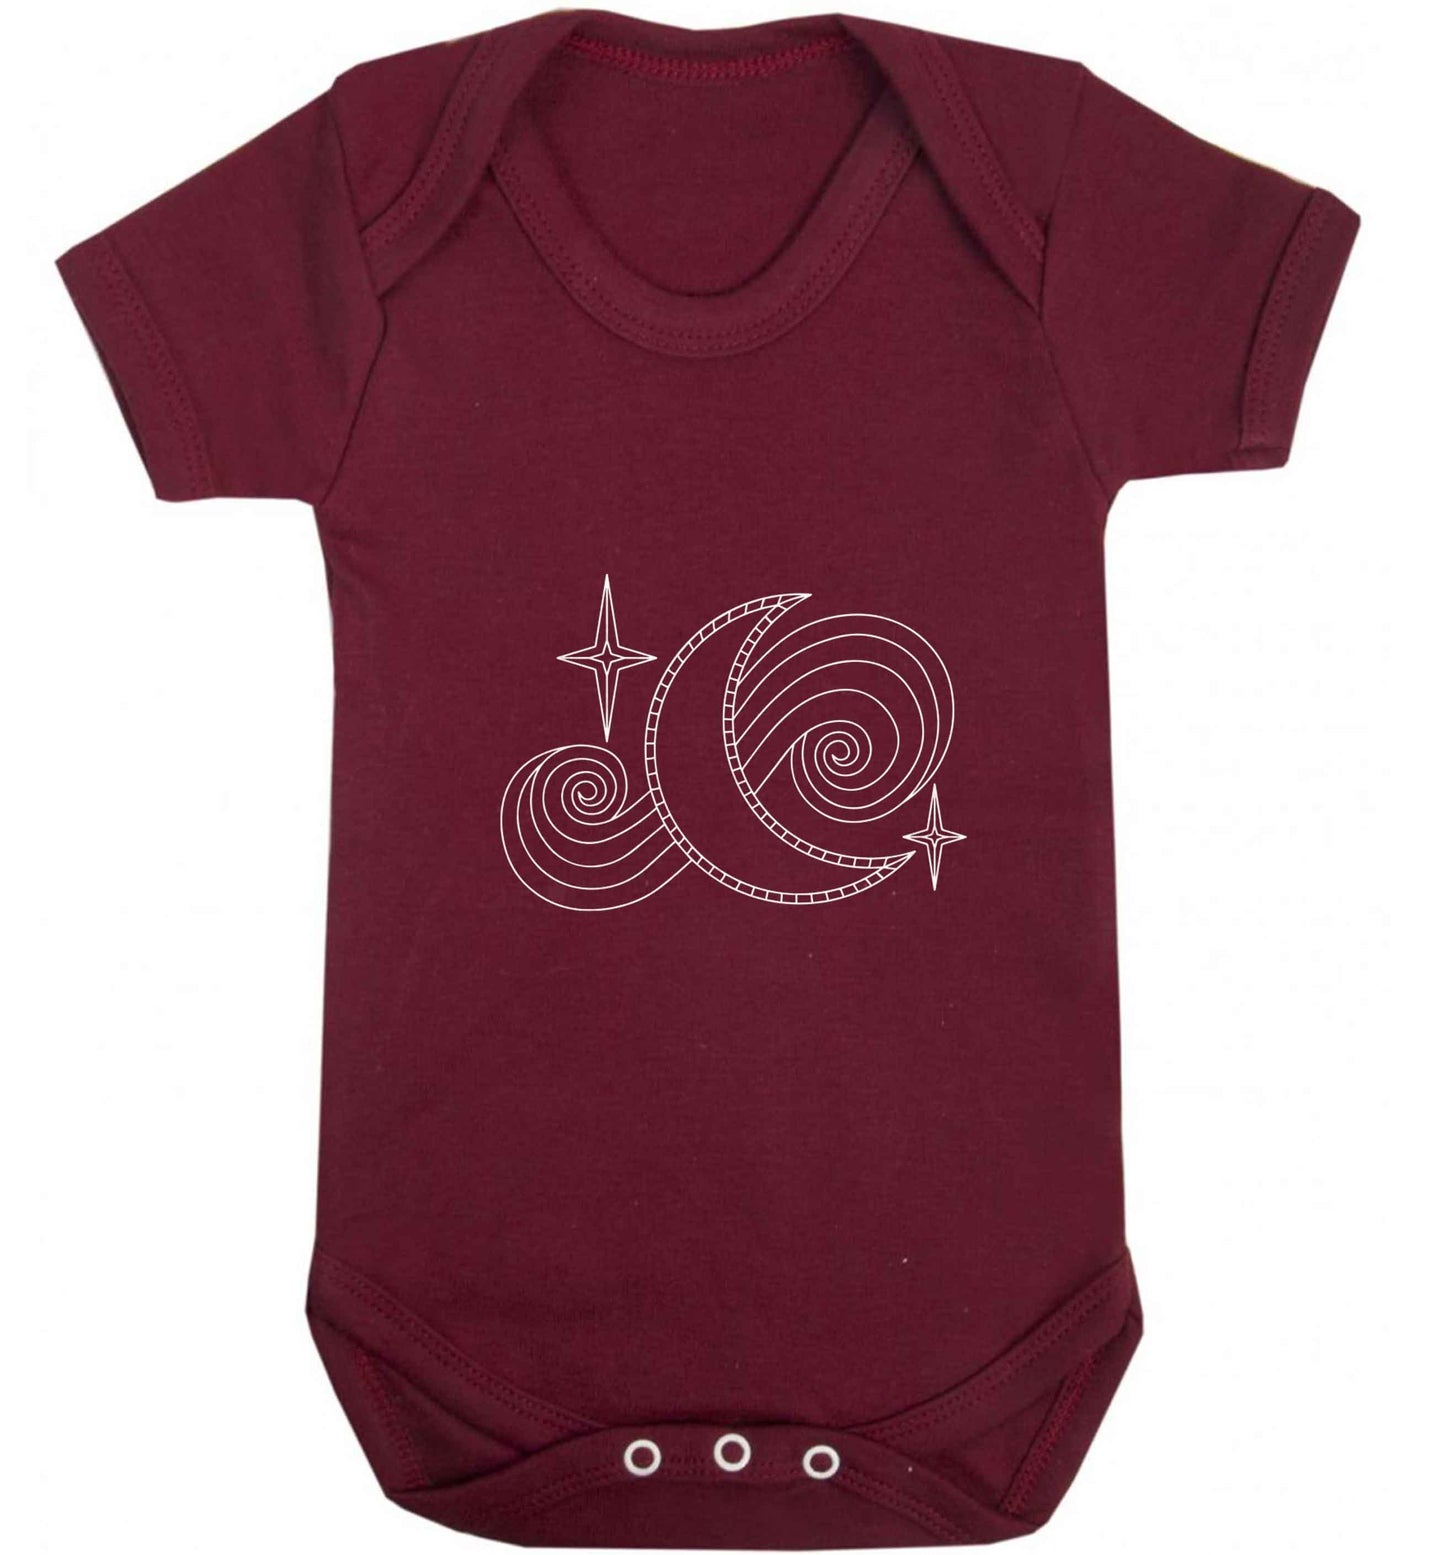 Moon and stars illustration baby vest maroon 18-24 months